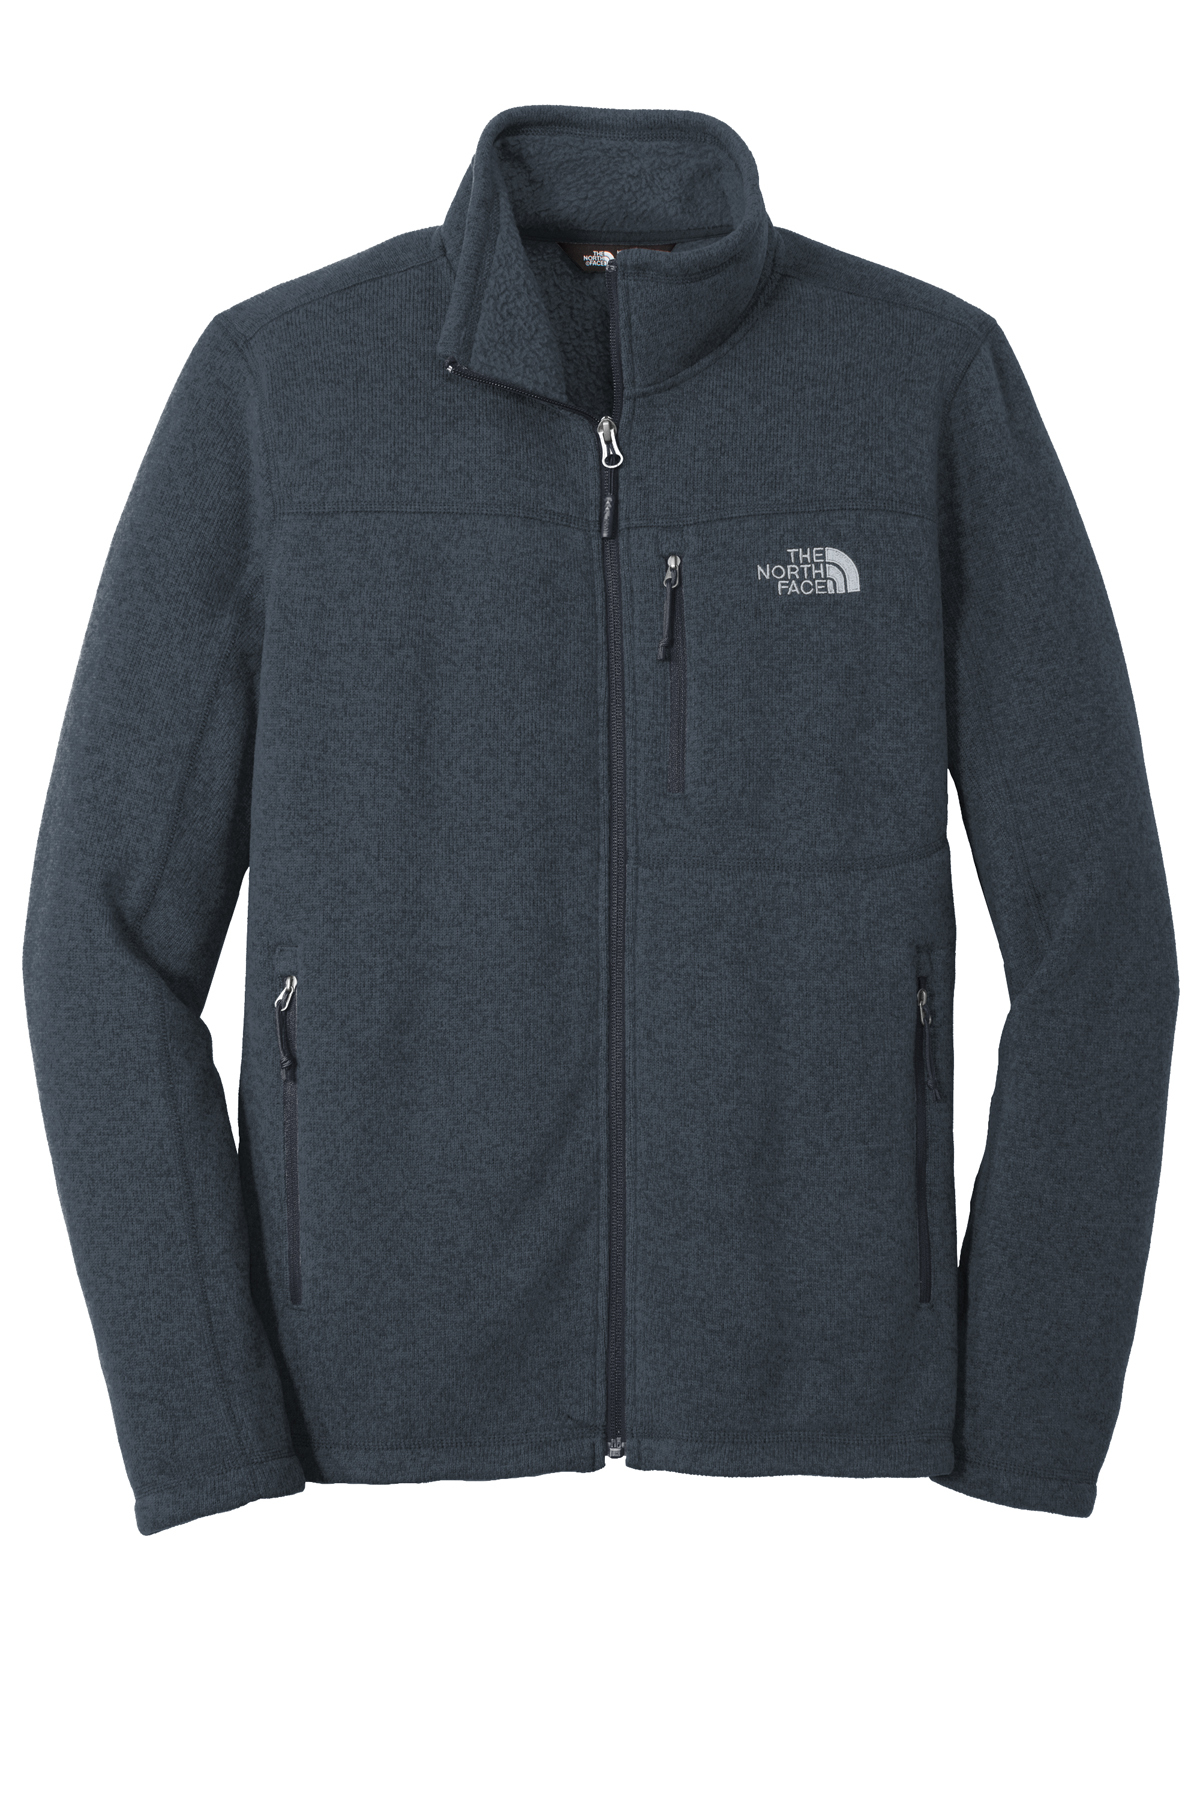 The North Face Sweater Fleece Jacket | Product | Company Casuals